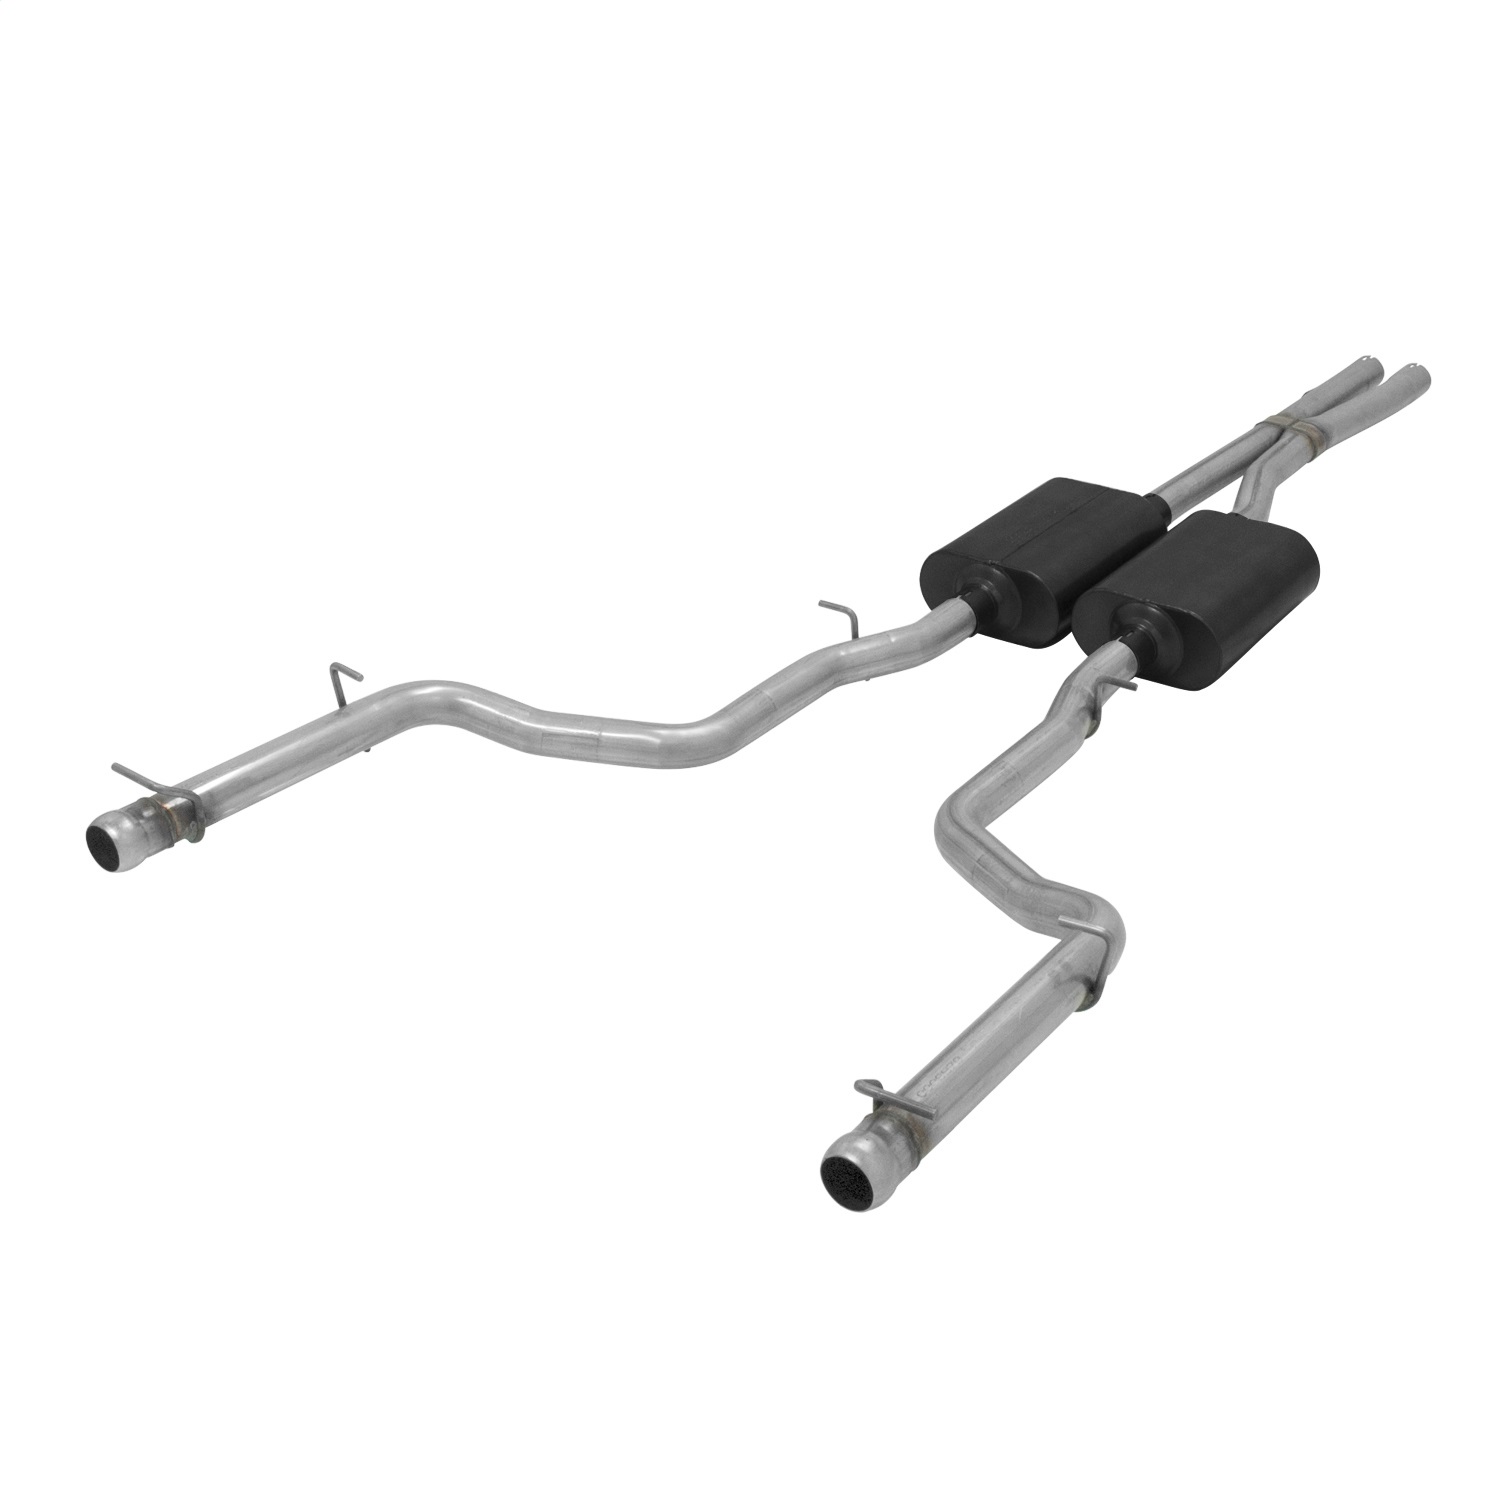 Flowmaster Flowmaster 817716 American Thunder Cat Back Exhaust System Fits 15 Challenger